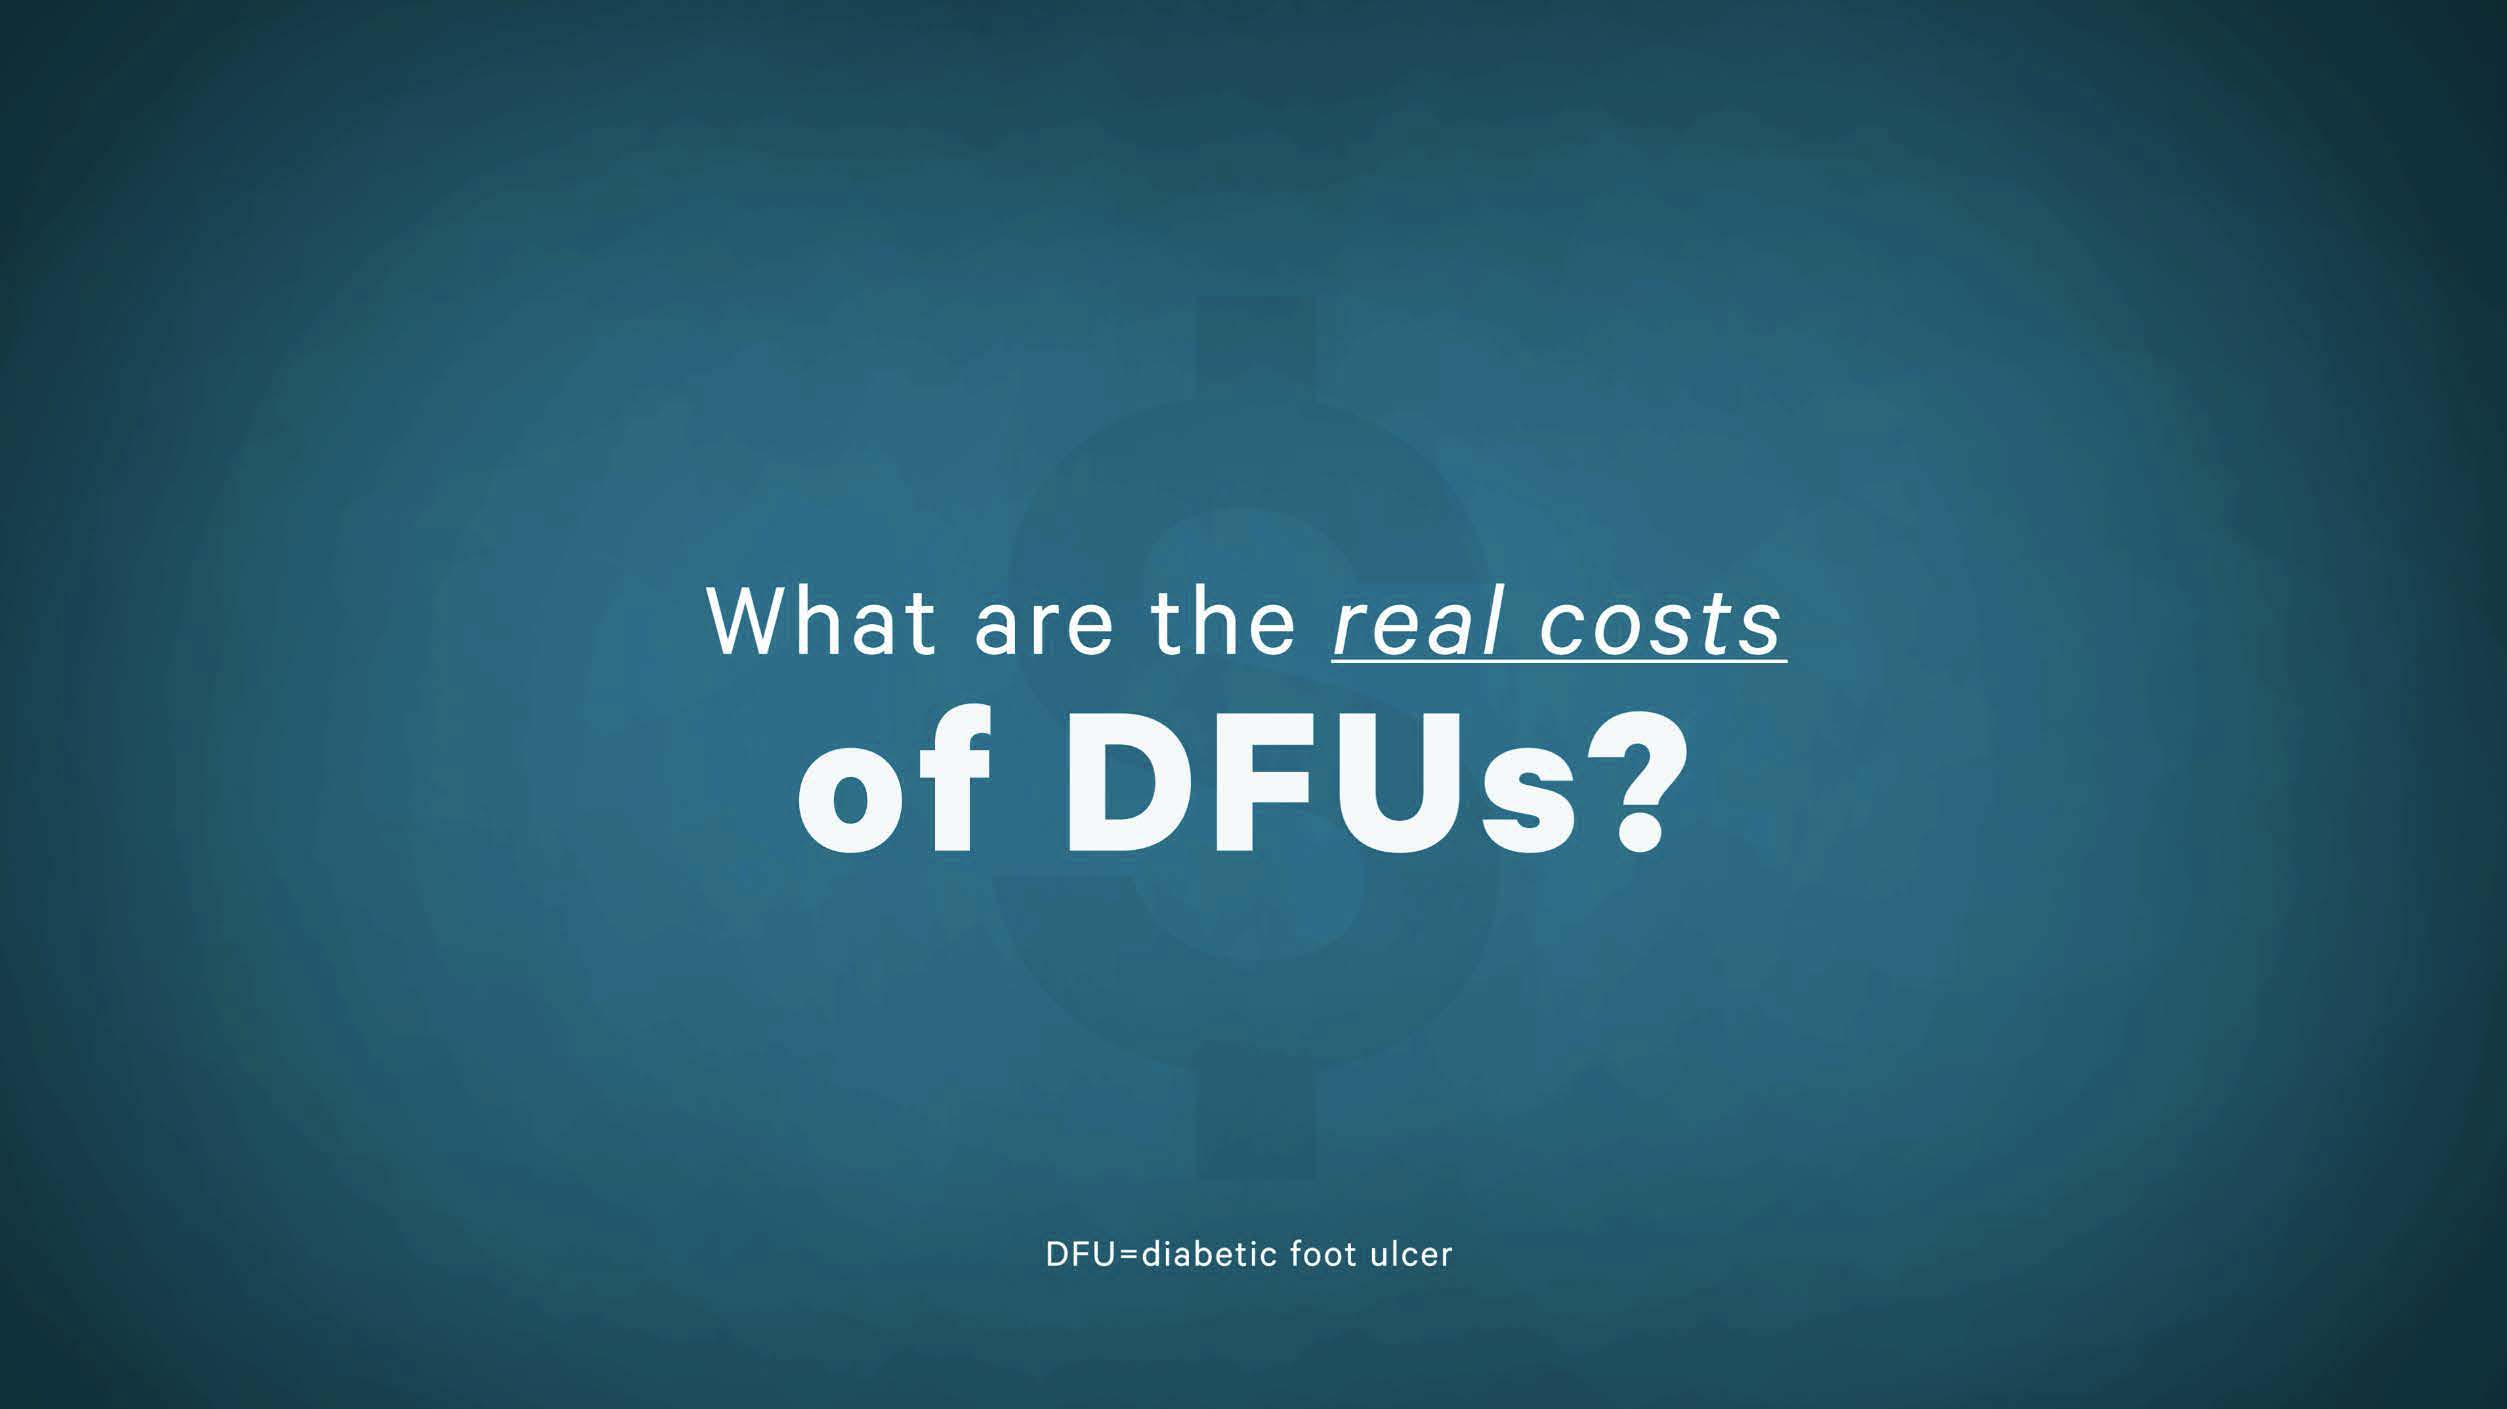 Video on the real costs of DFUs